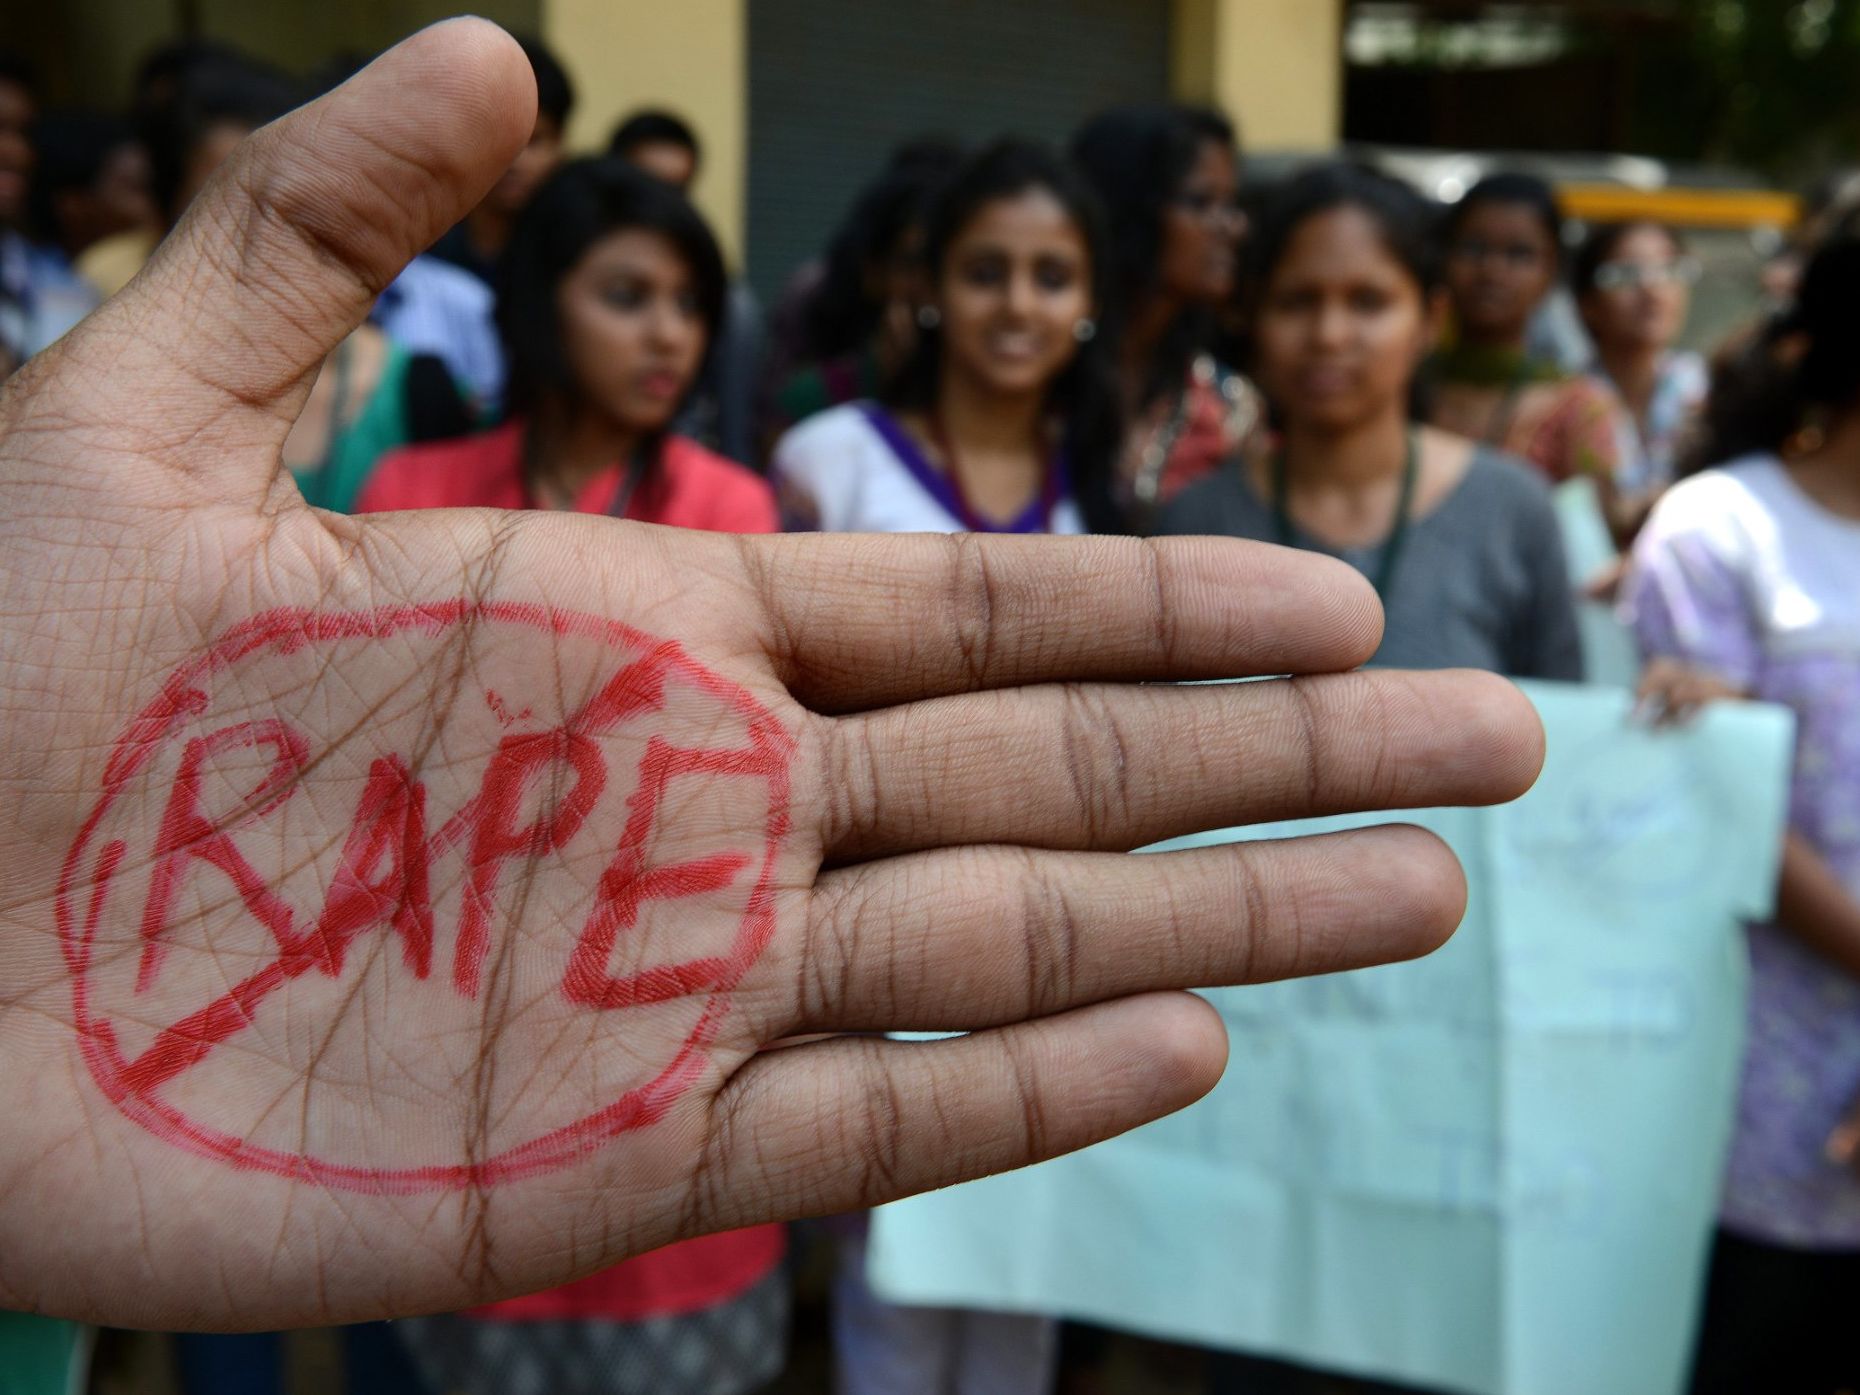 Despite reforms, sexual assault survivors face systemic barriers in India |  CNN